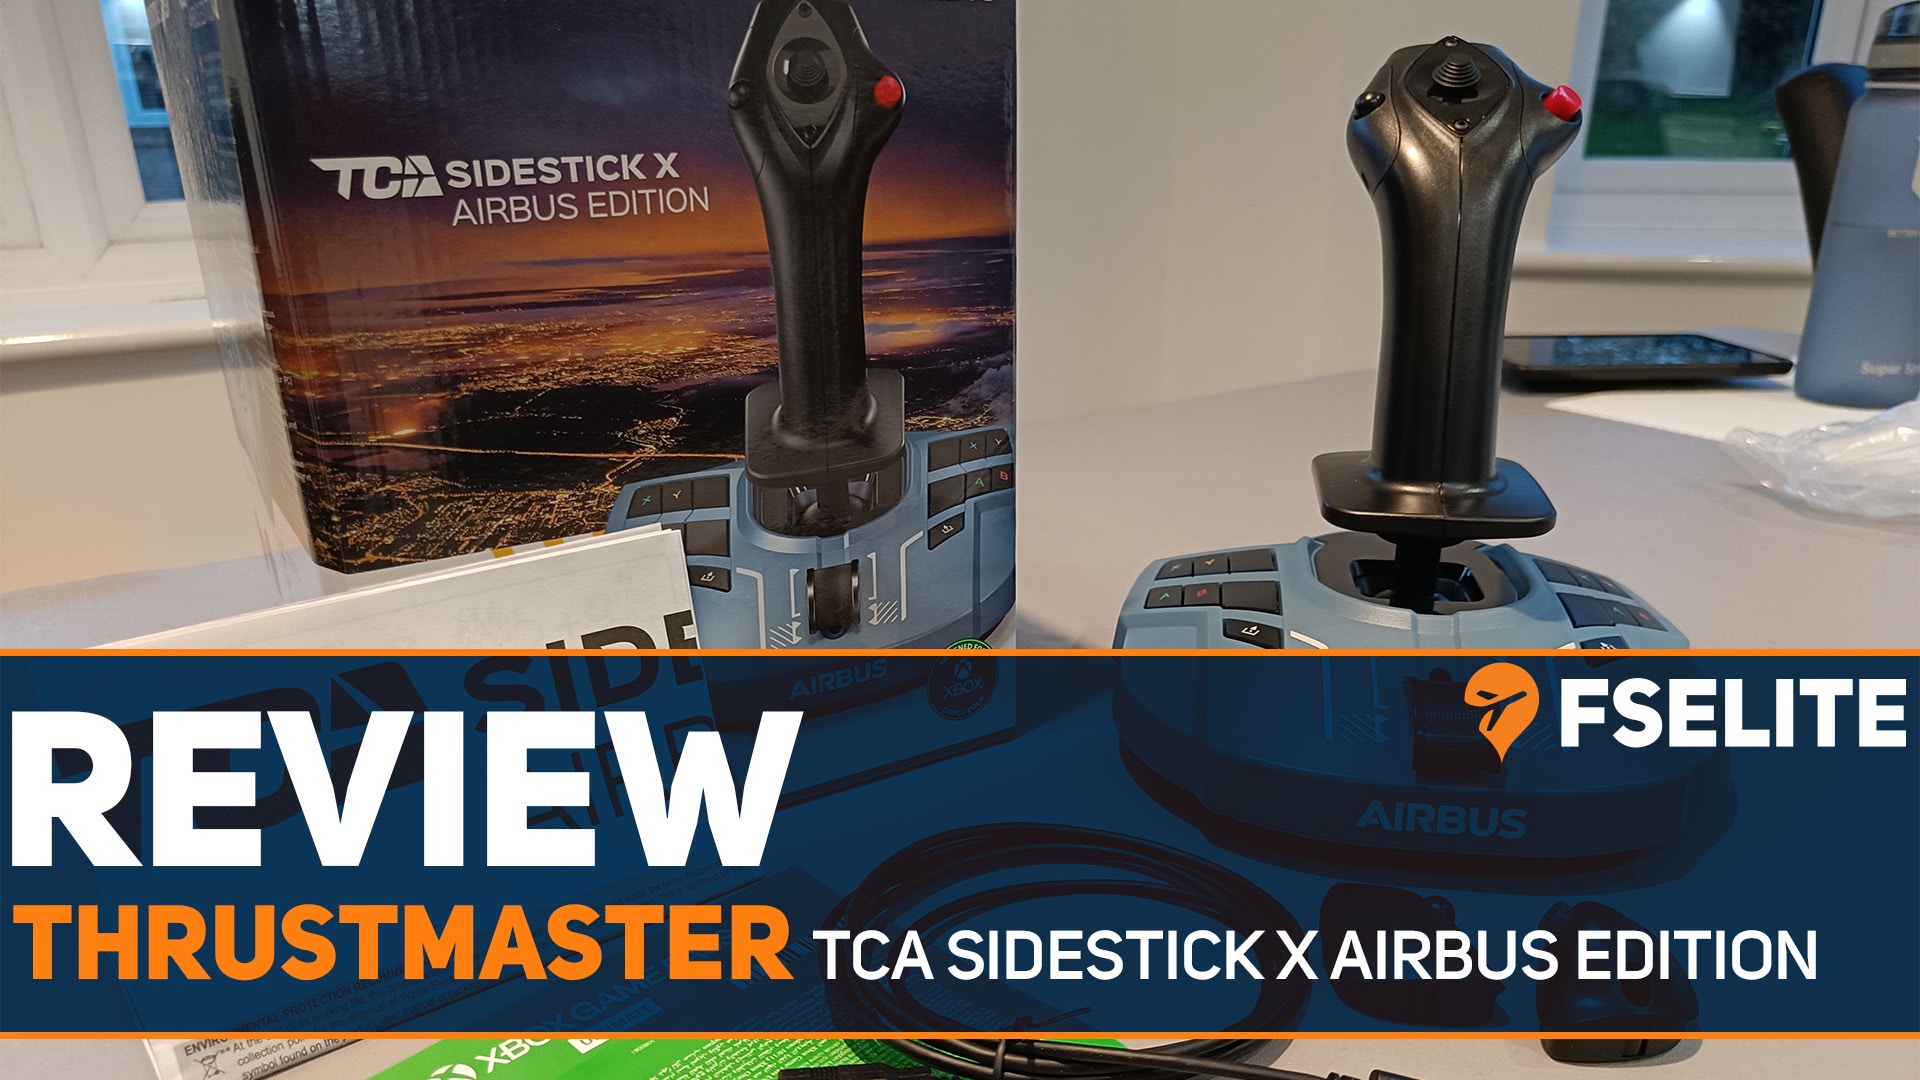 Review: Thrustmaster TCA X Airbus FSElite - Edition Sidestick